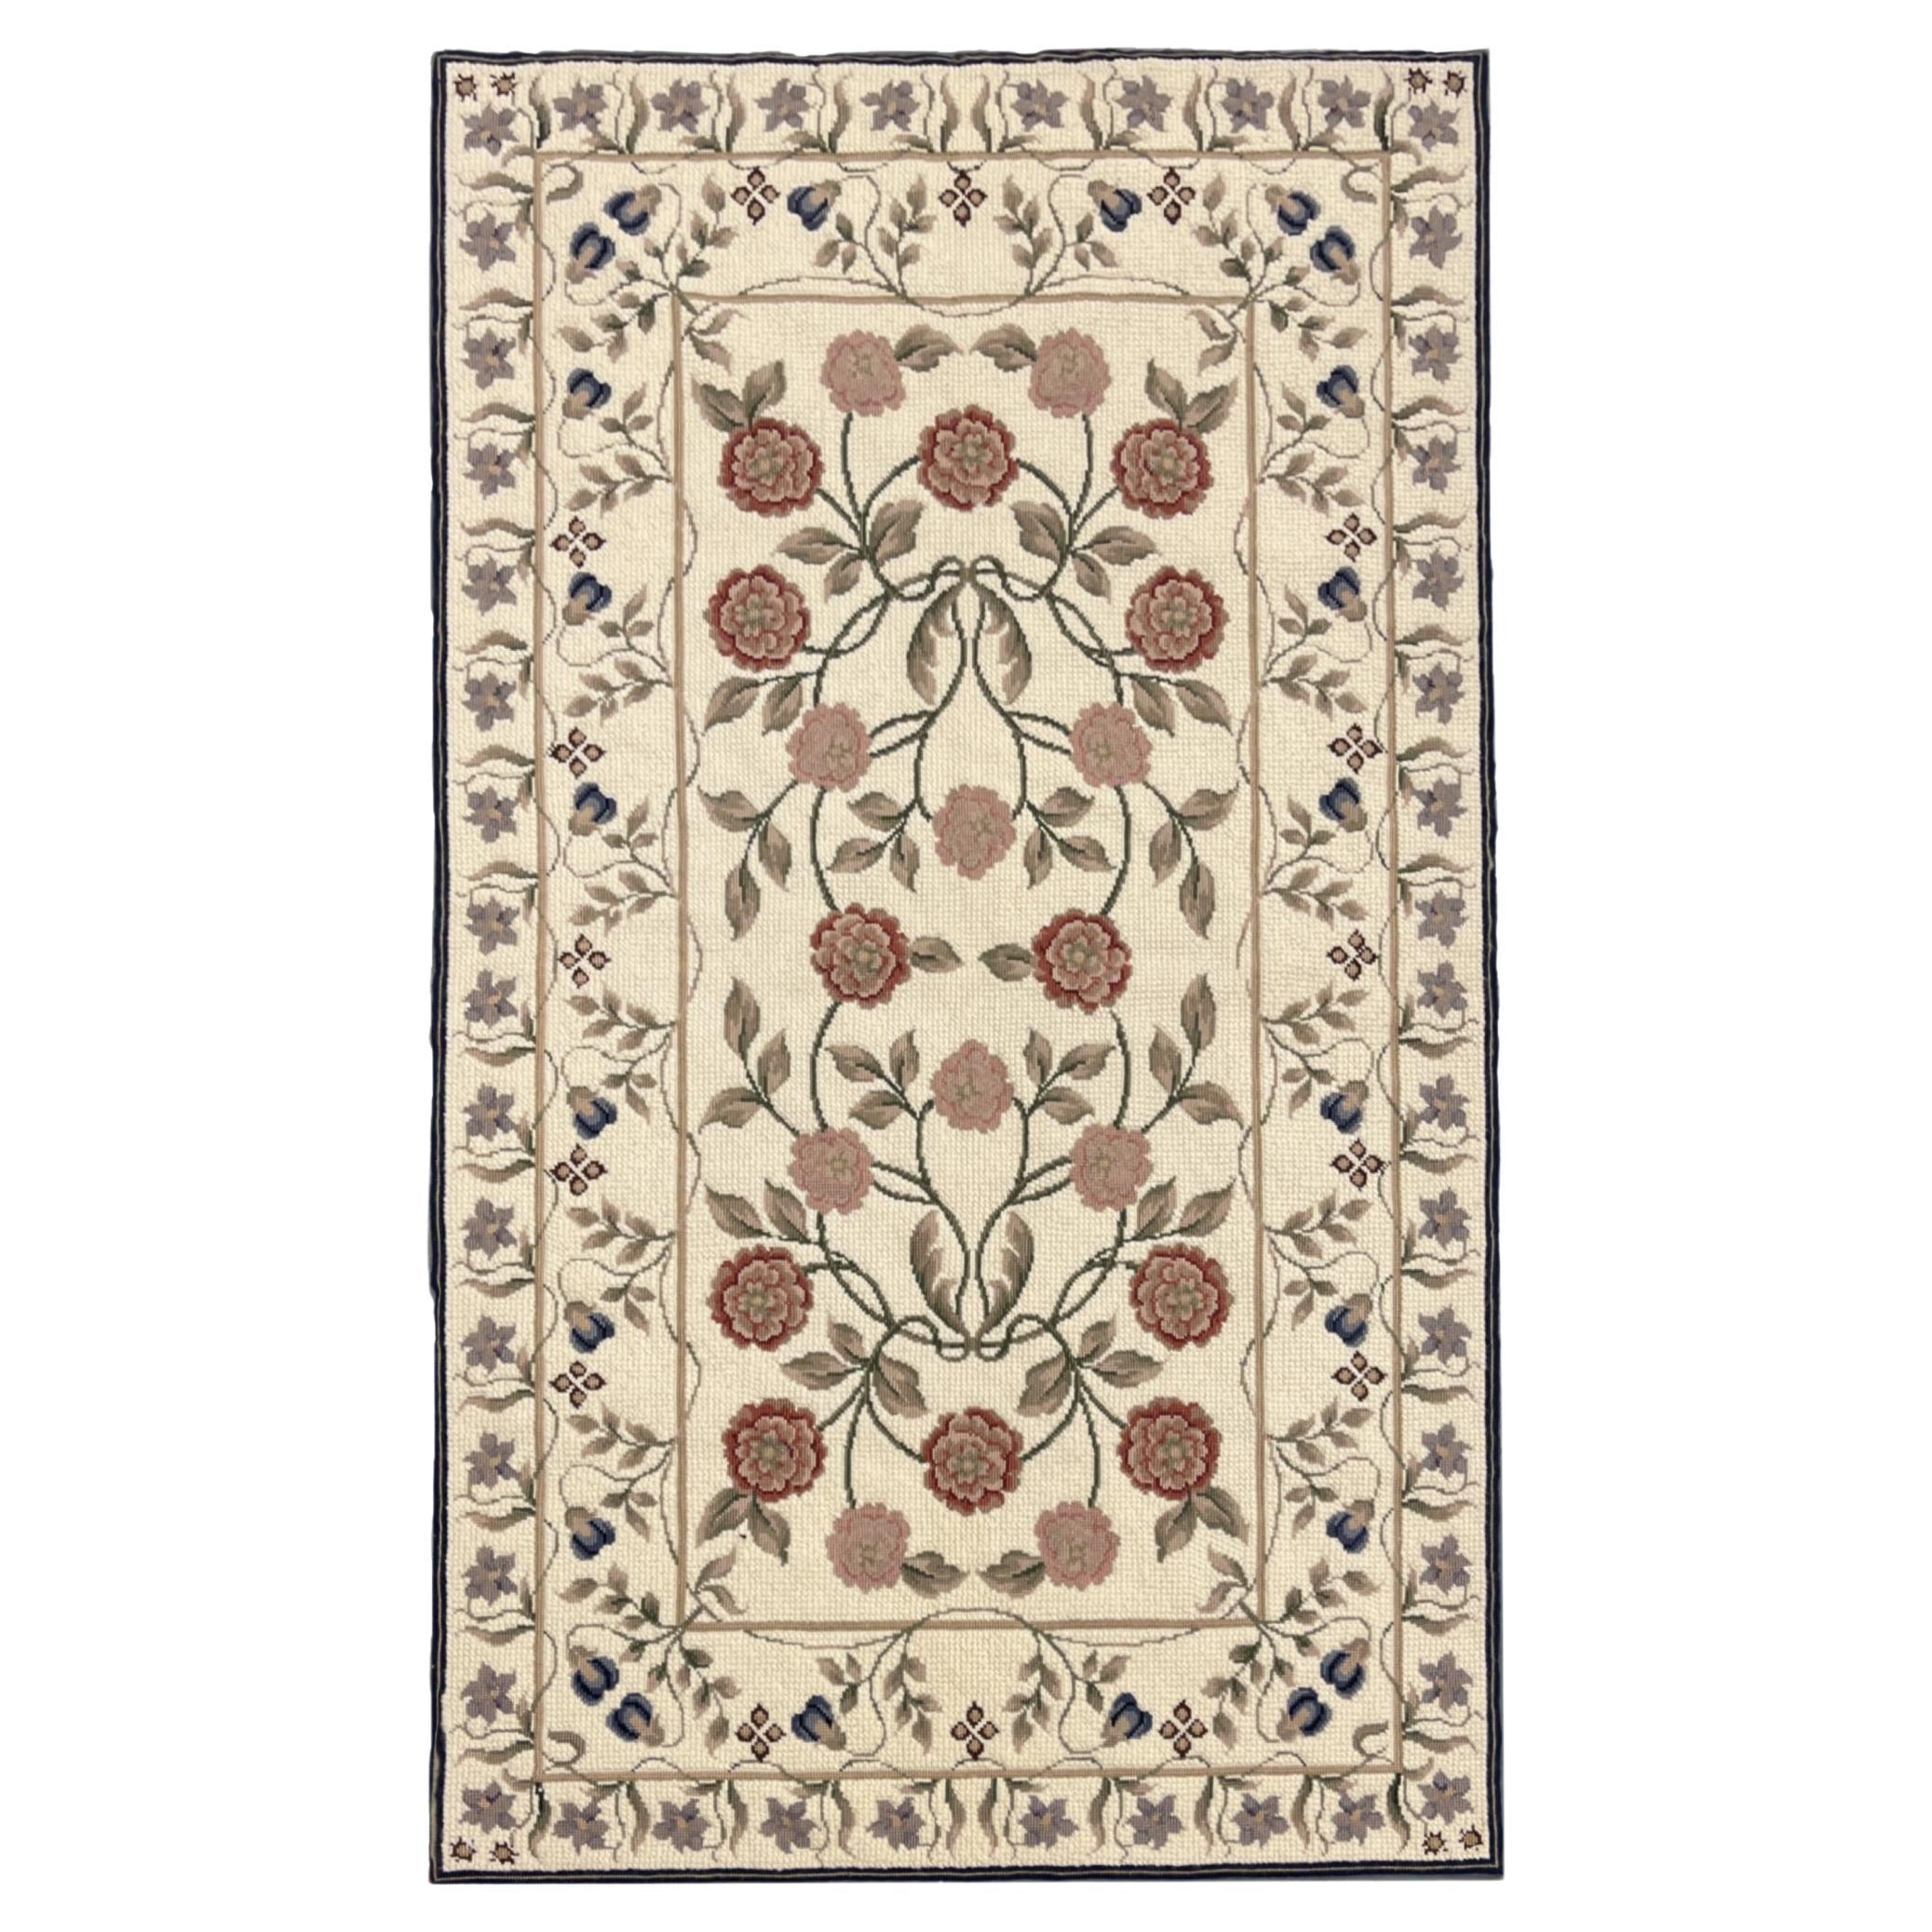 Traditional Carpet Floral Aubusson Rug Handwoven Wool Needlepoint Rug Home Decor For Sale